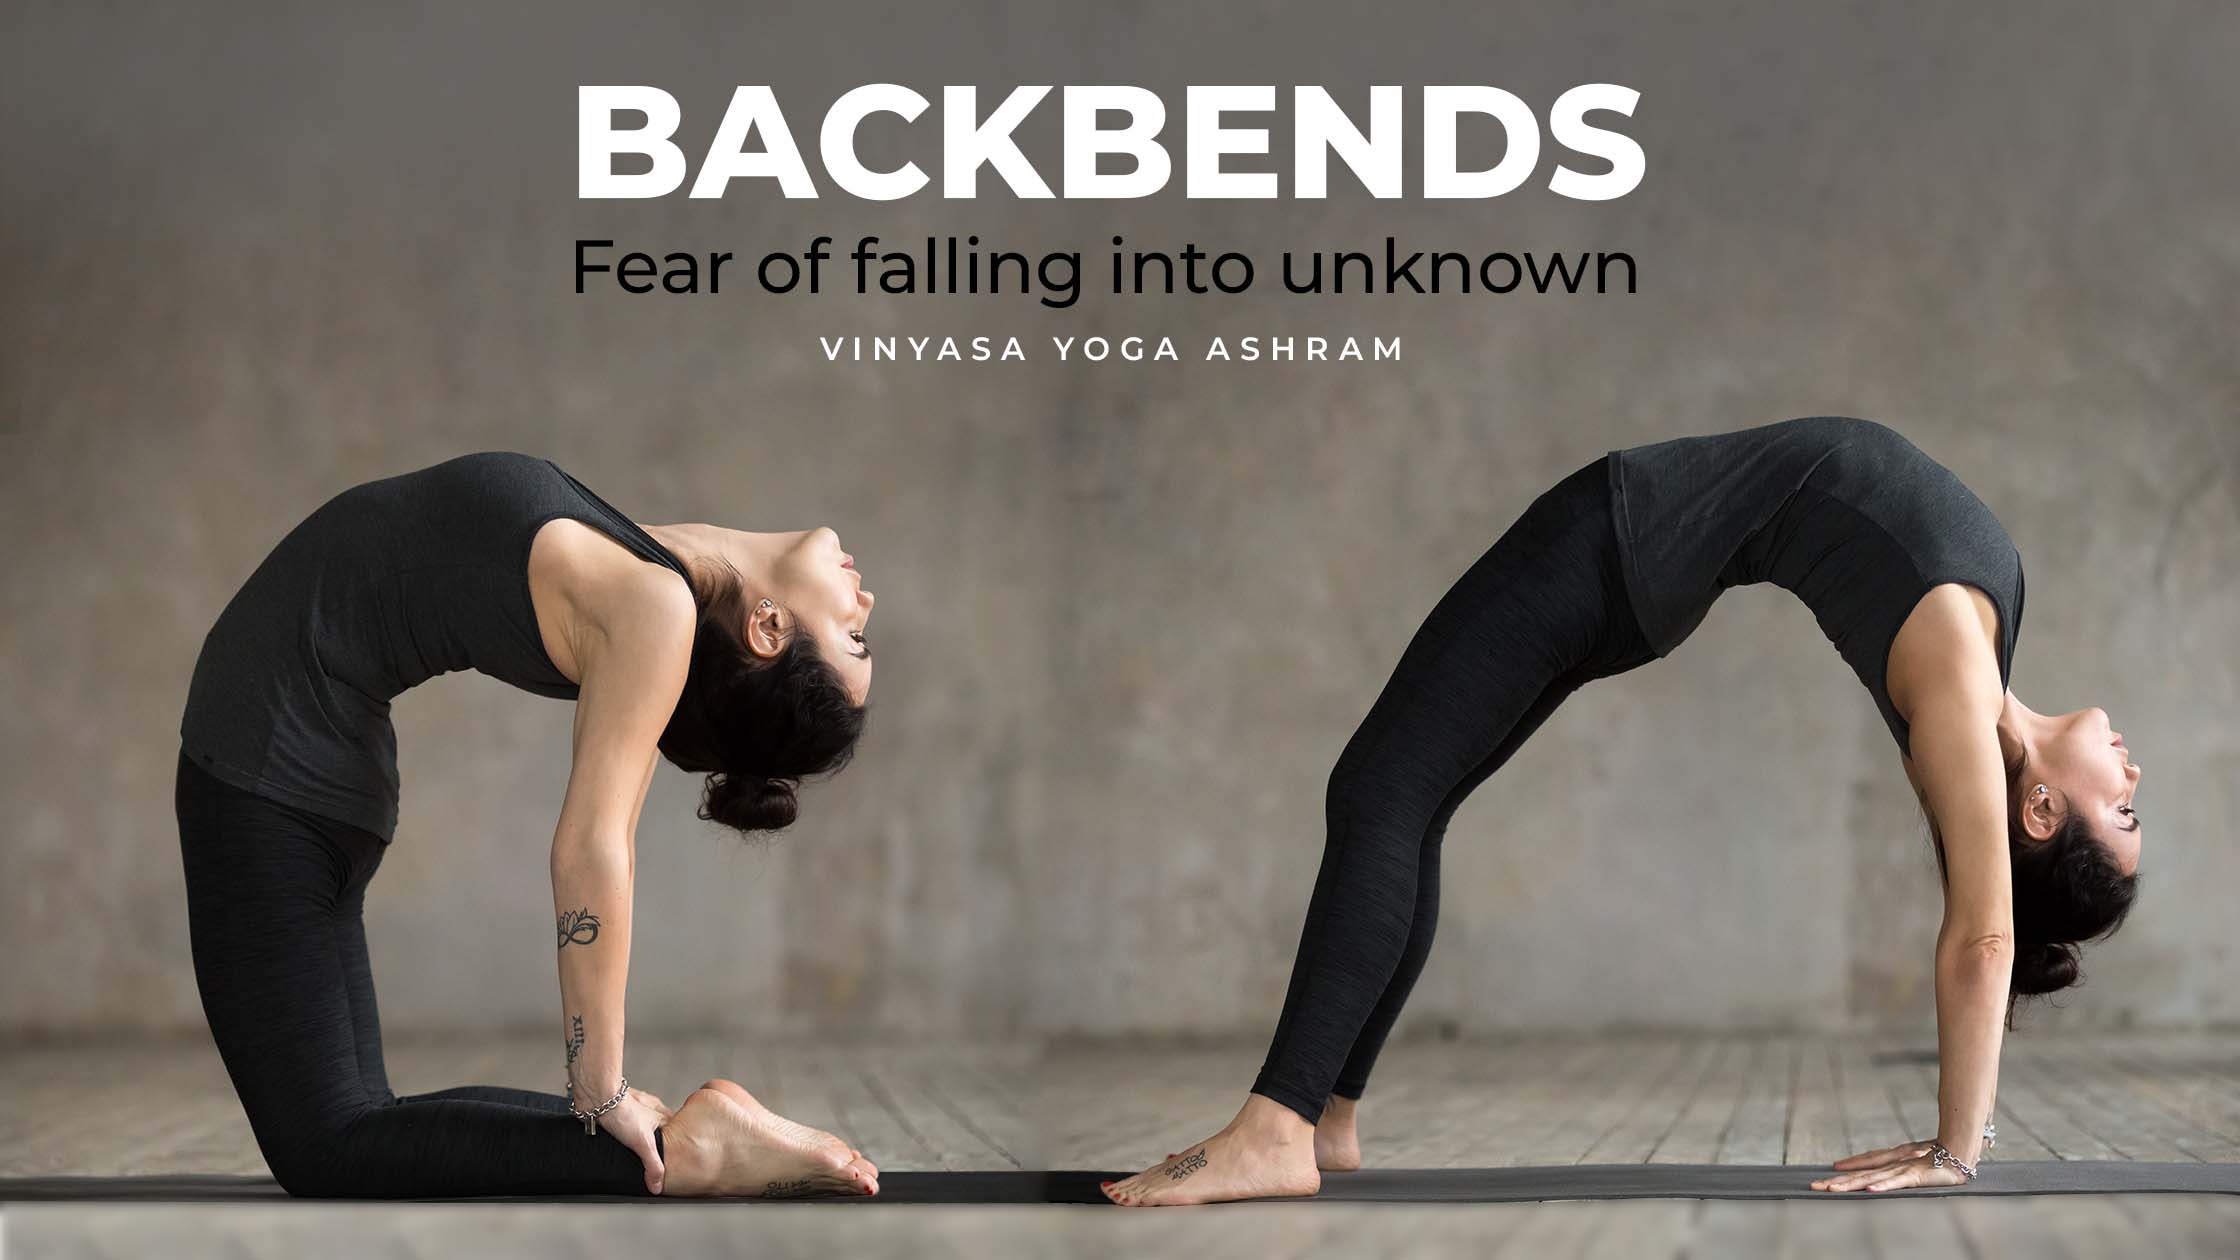 6 Effective Ways to Sequence Any Backbending Practice